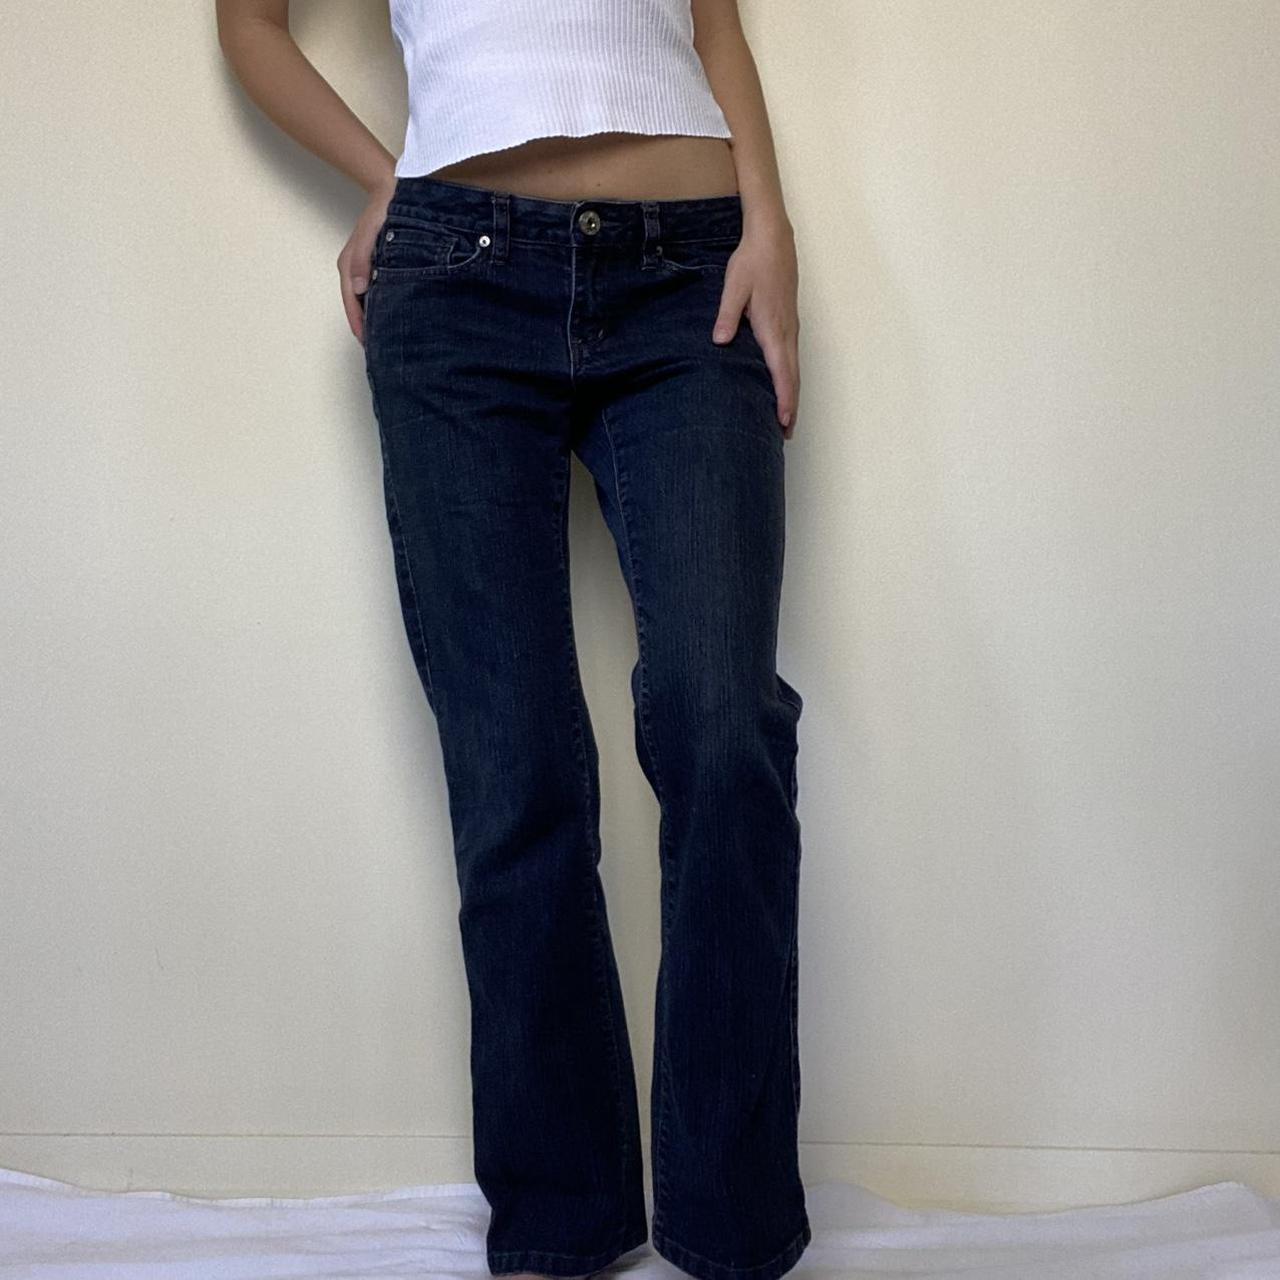 Mid rise bootcut jeans By JAG Labelled size 9 ... - Depop